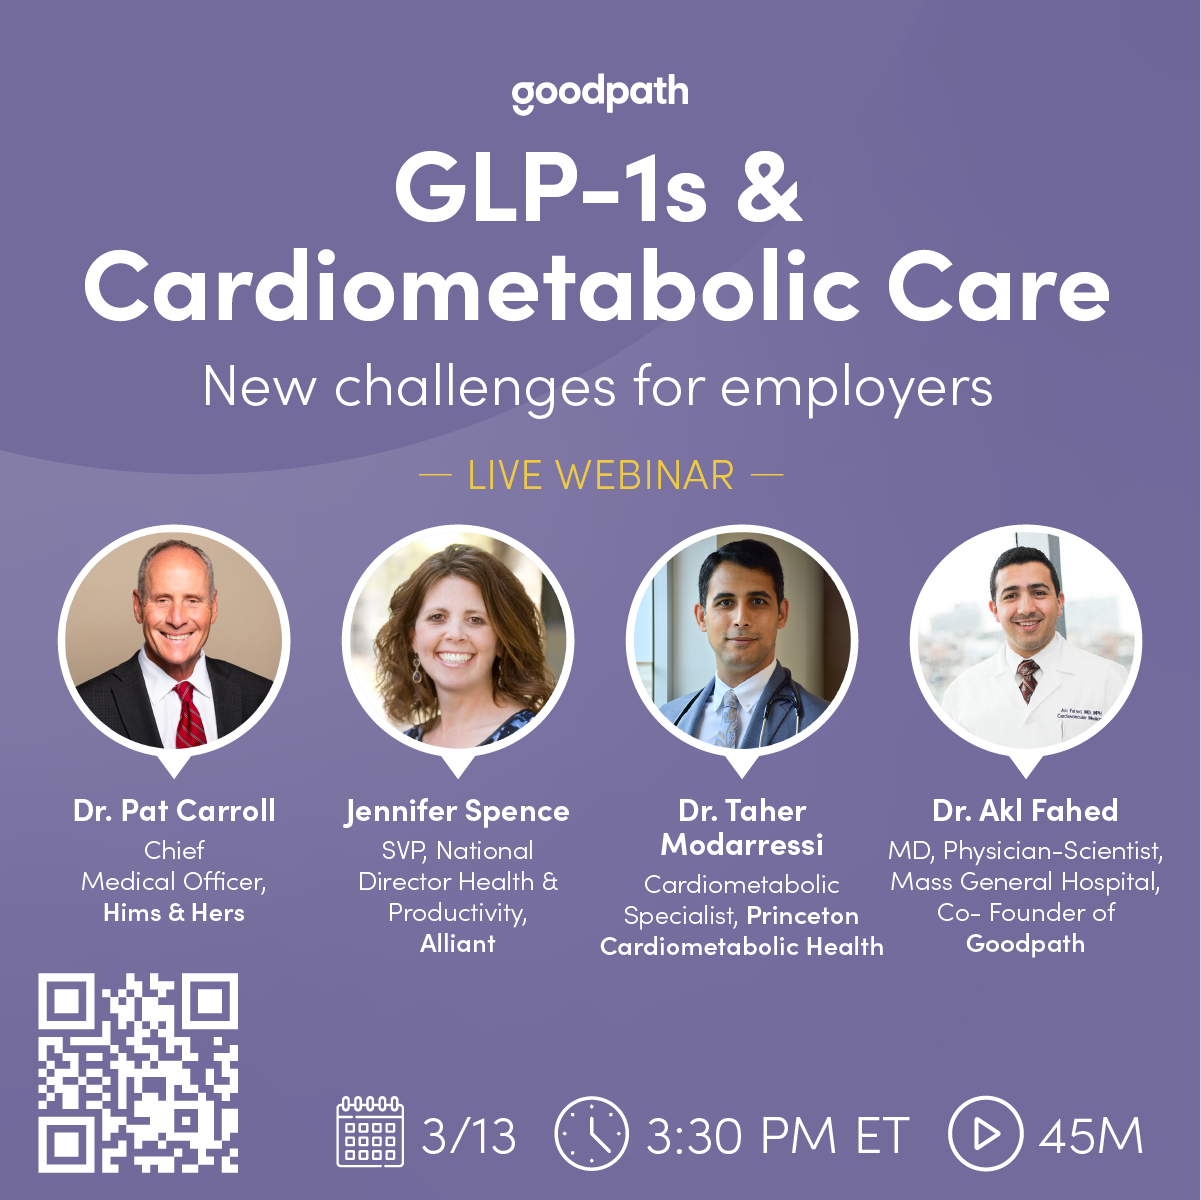 Upcoming Webinar: GLP-1s & Cardiometabolic Care - New Challenges for Employers